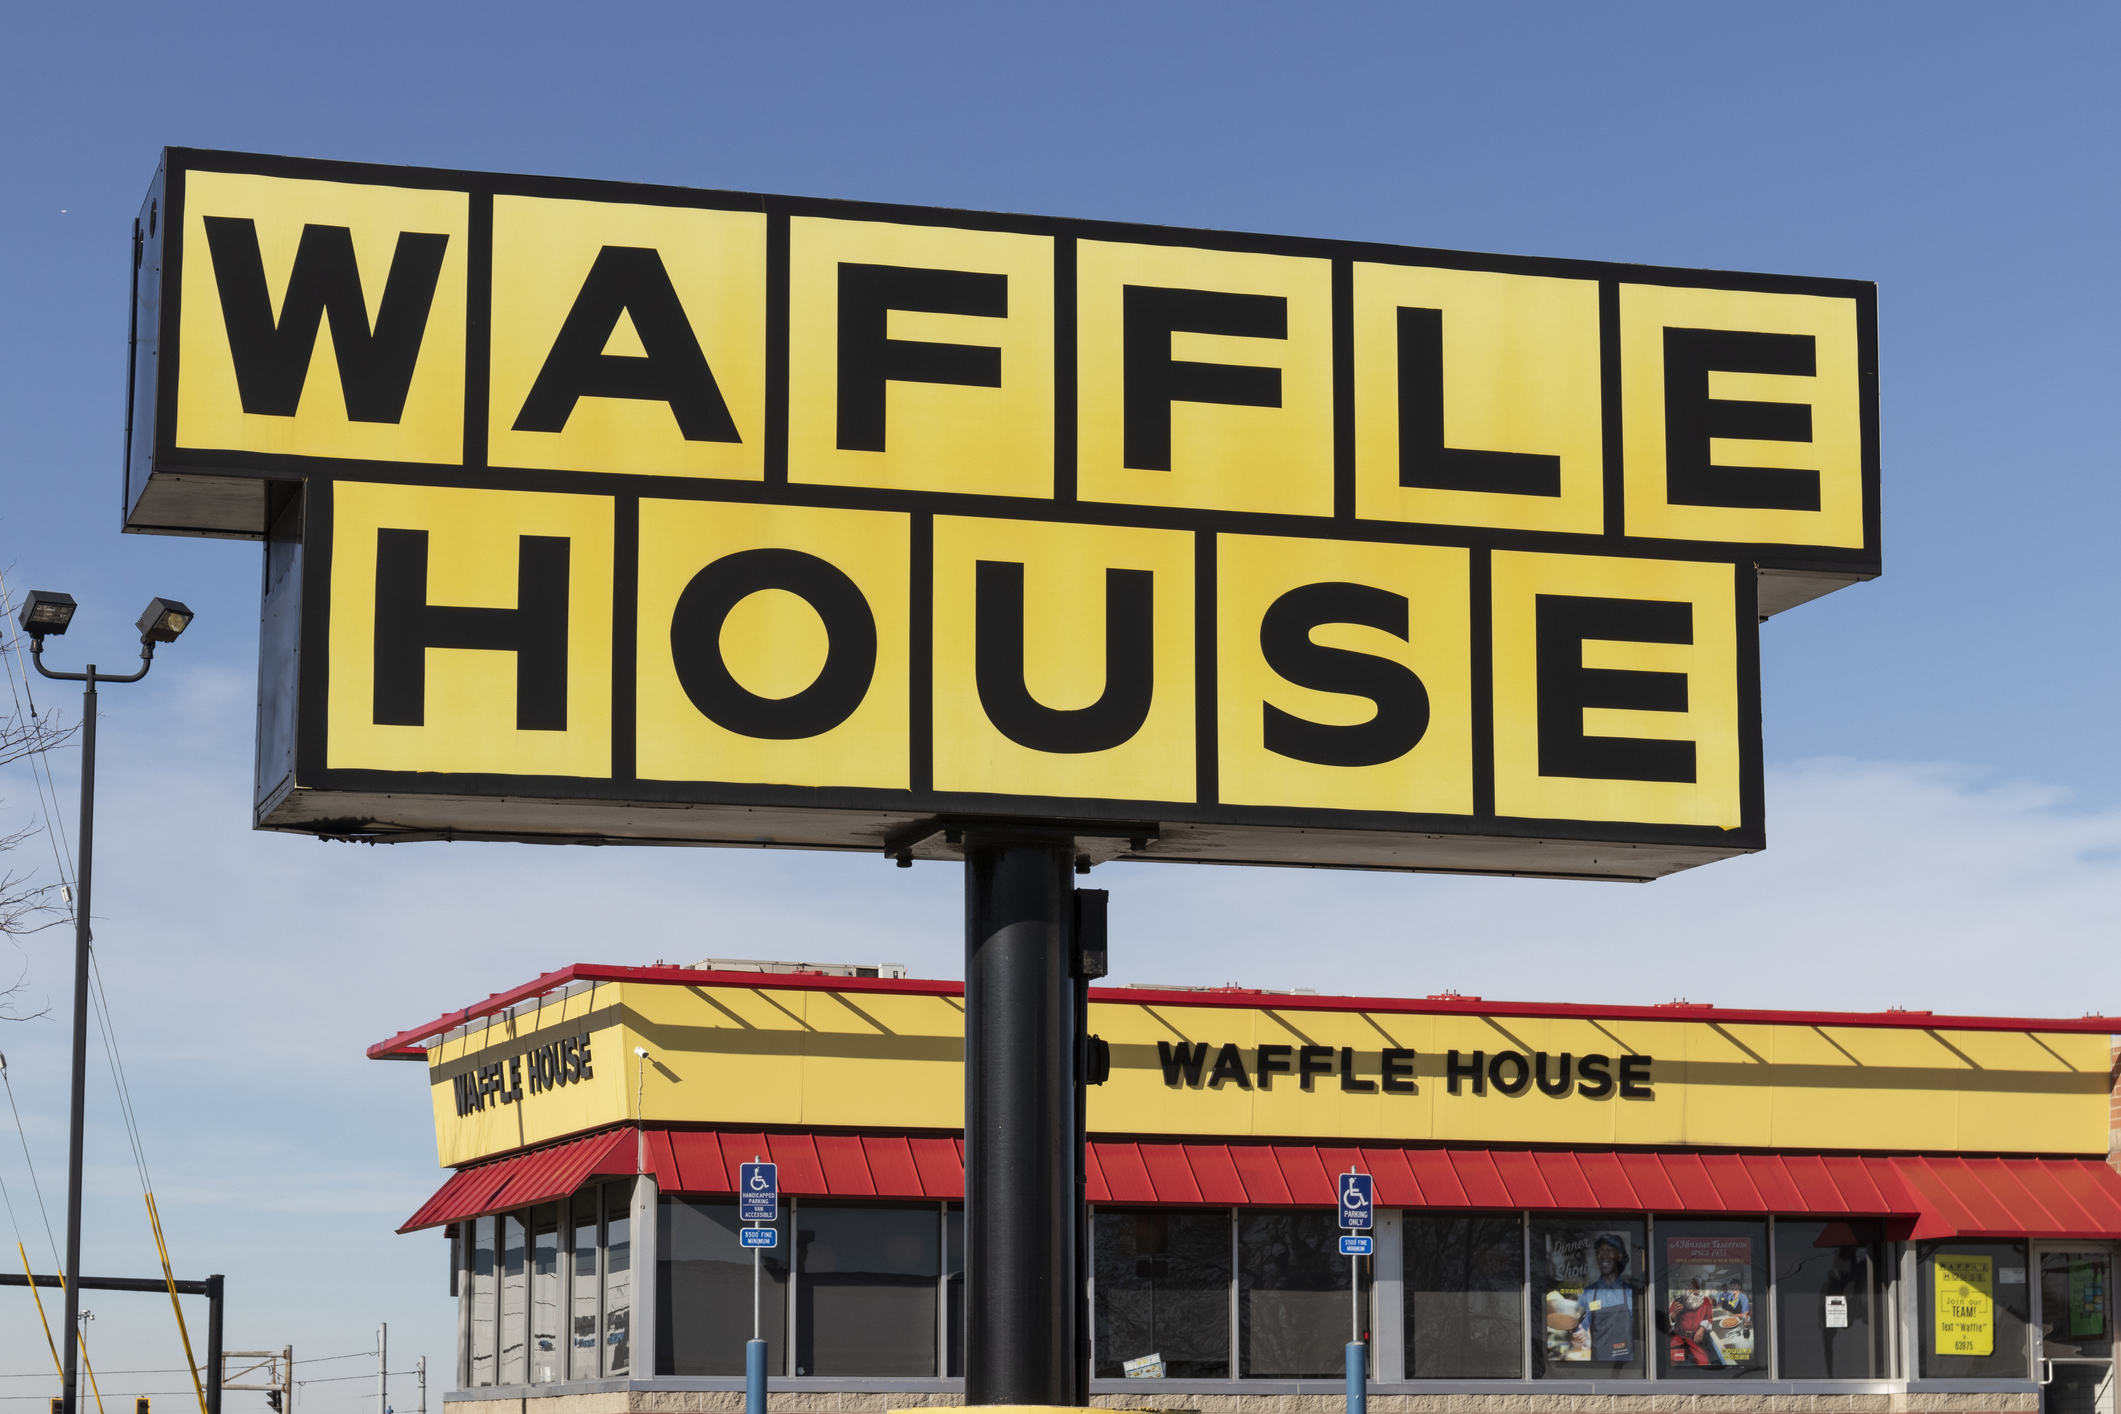 Waffle House restaurant exterior with bold signage in foreground and building in background